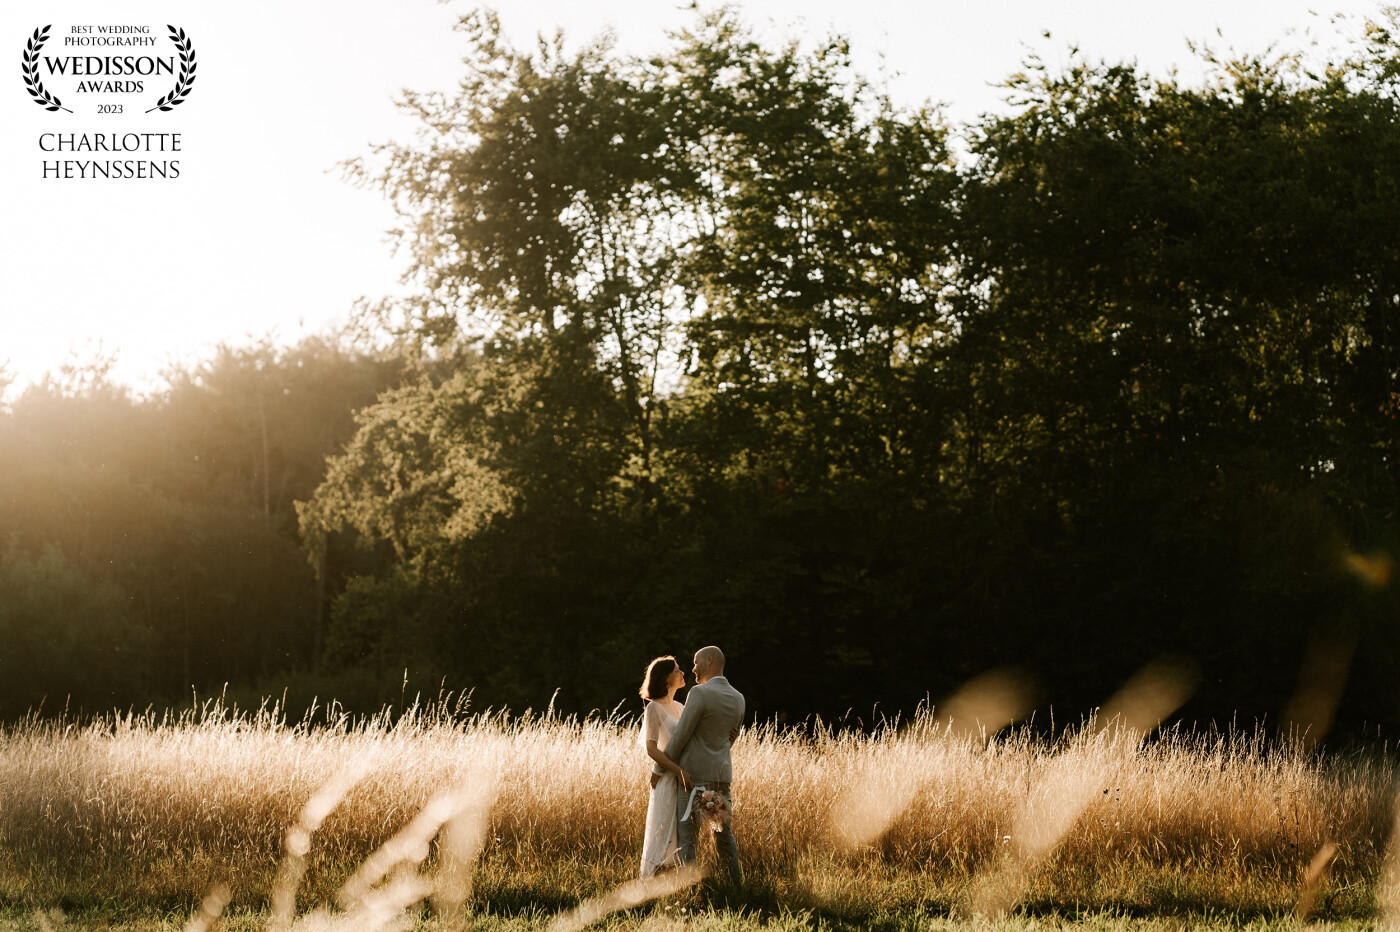 As I was walking with the couple through this beautiful landscape, the light fell just right on this patch of long grass. I made the couple climb over a small pit in order to get there, but they didn't mind. They started dancing and I was very happy to capture this moment.